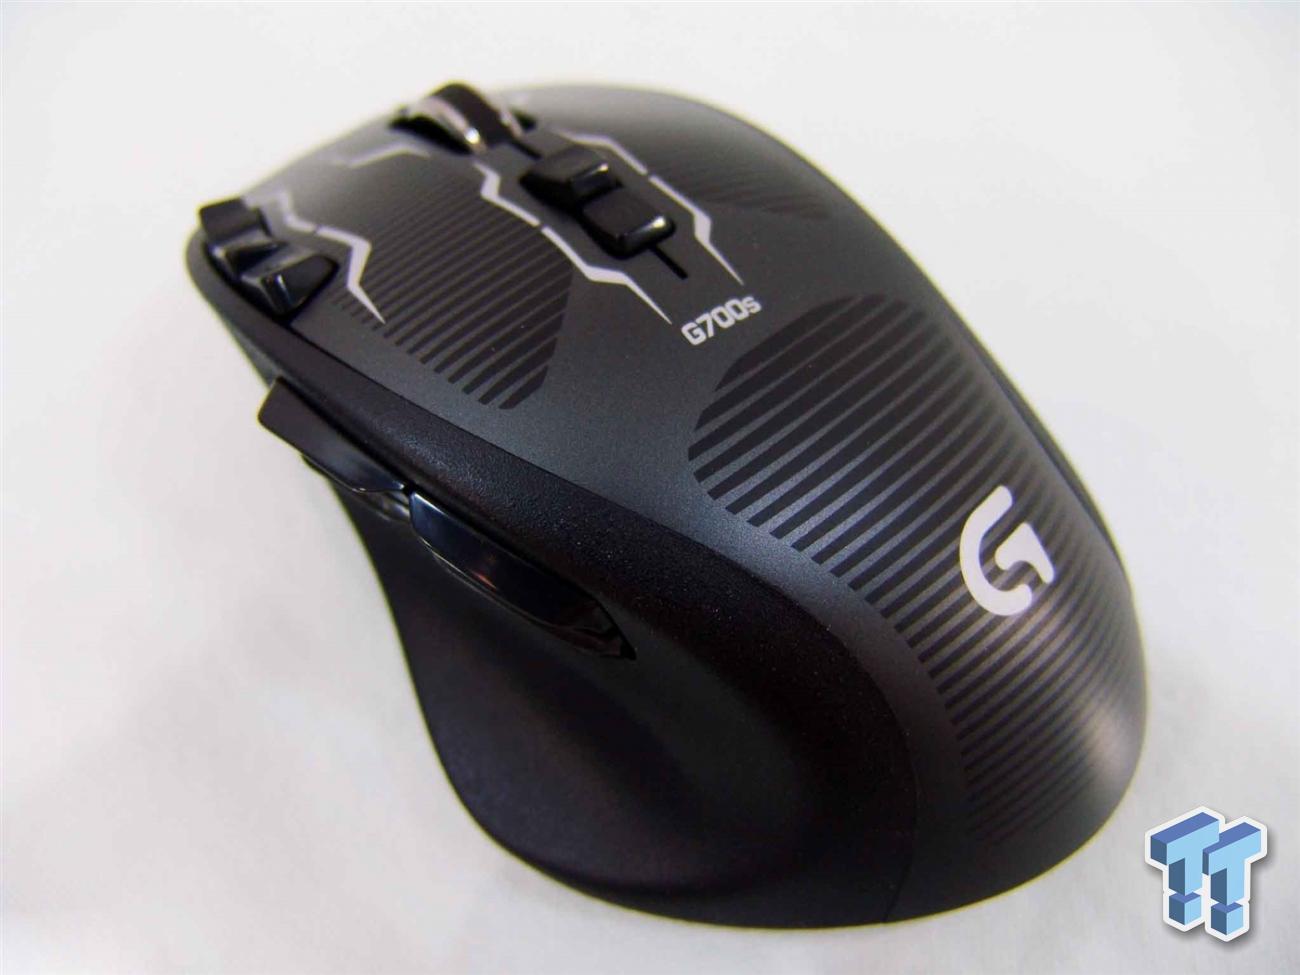 G700s Rechargeable Gaming Review